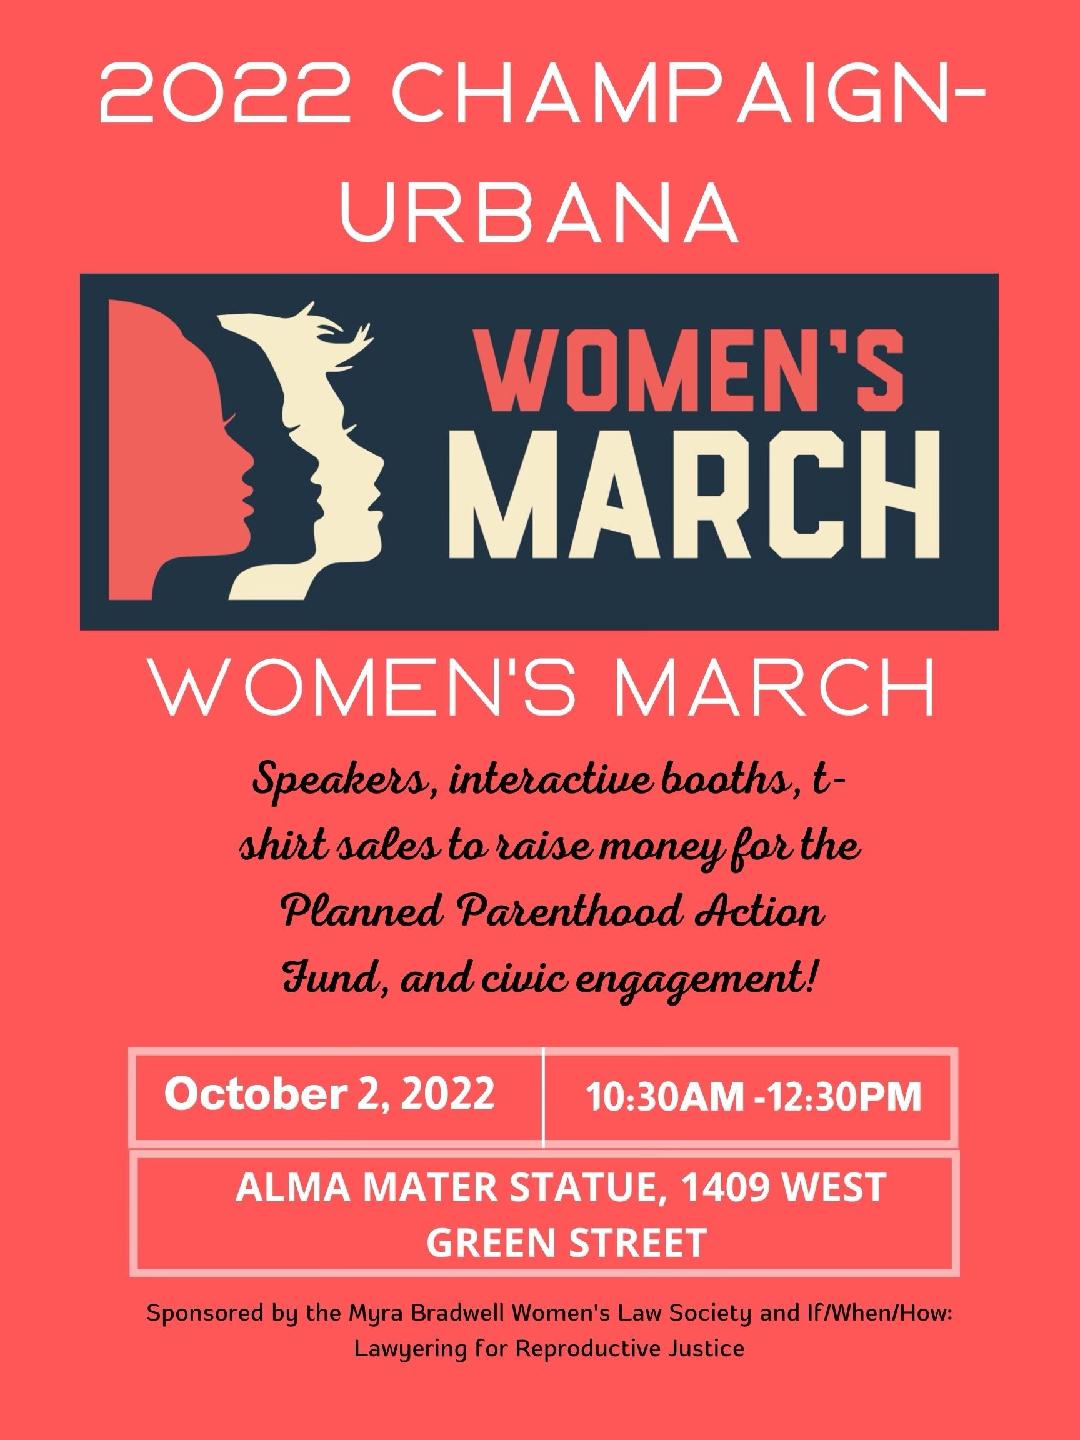 A coral colored poster for the 2022 Champaign-Urbana Women's March. There is white text that provides details for the march, including the route and time of departure. Image courtesy of the Women's Law Society at the University of Illinois Urbana-Champaign. 